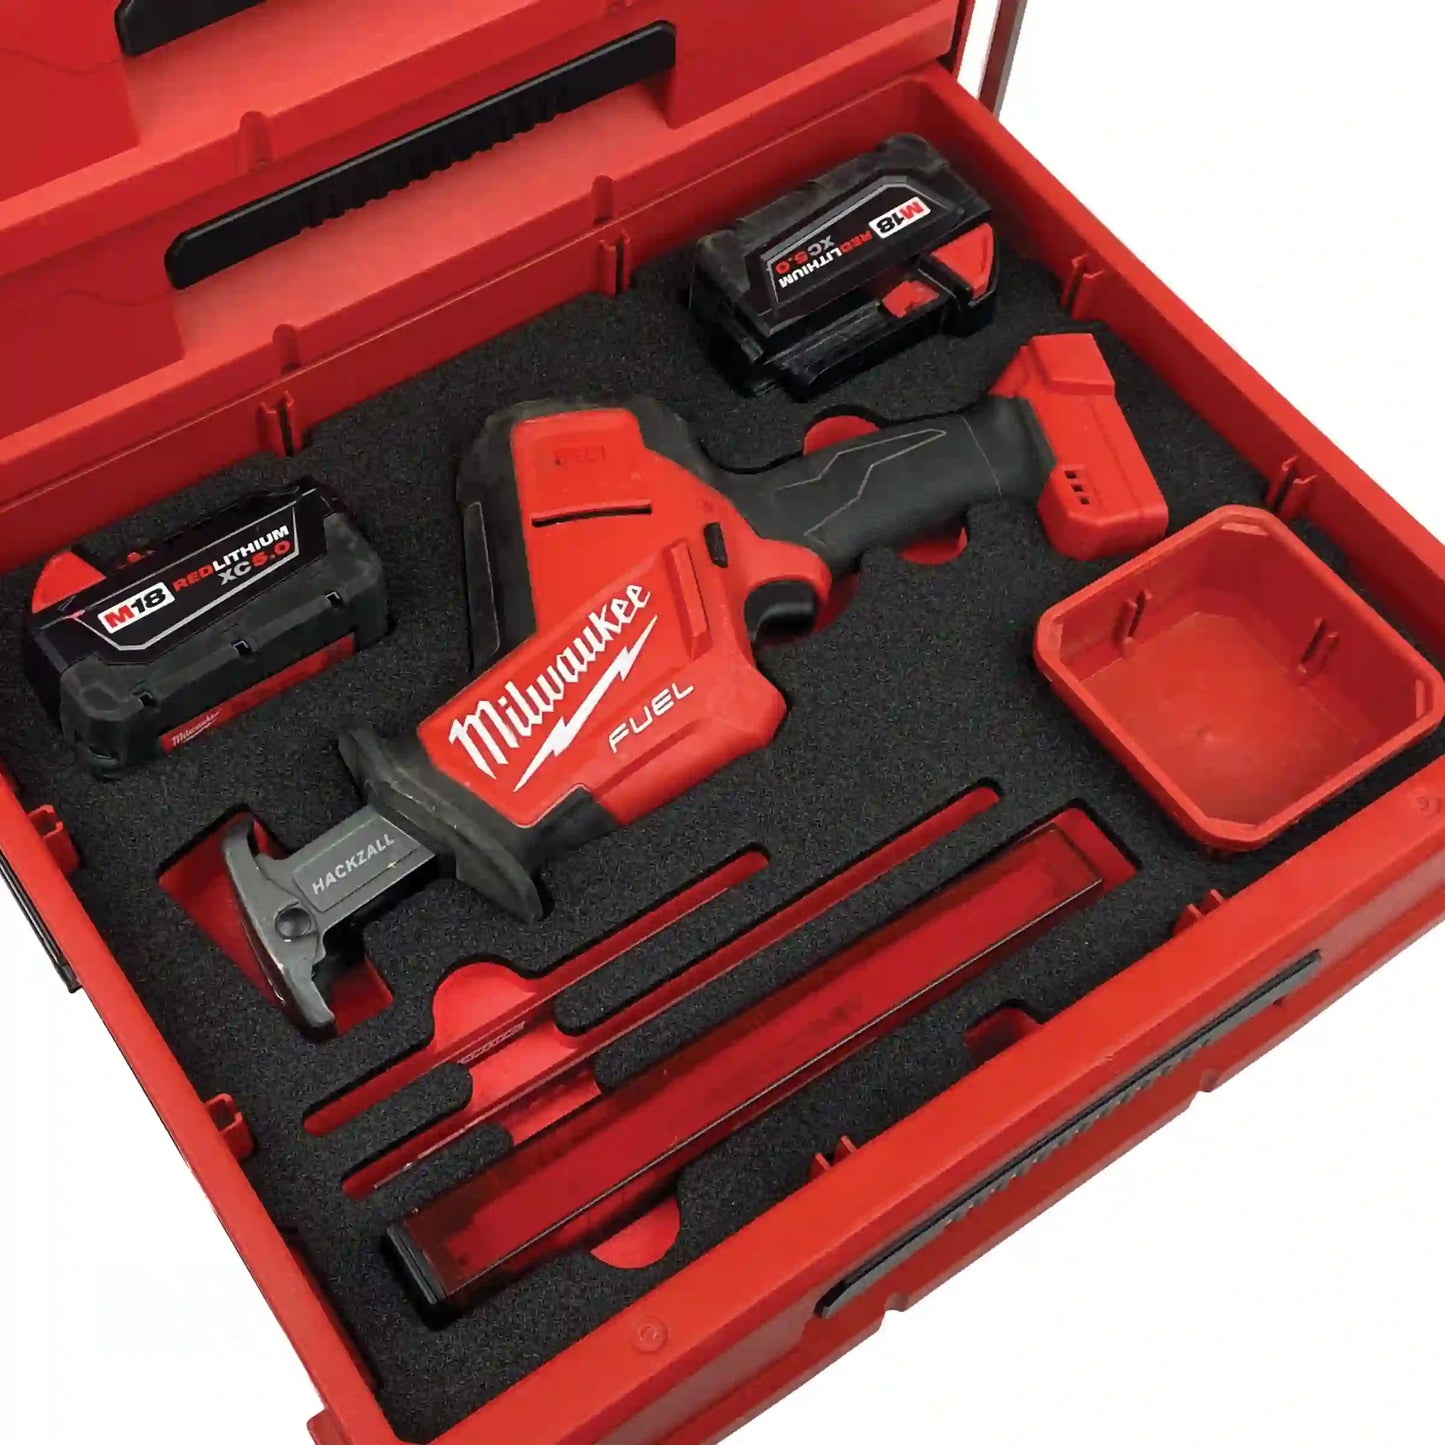 FOAM INSERT to store M18 Fuel Hackzall 2719-20 in a Milwaukee Packout 2 Drawer Tool Box - Tools NOT Included